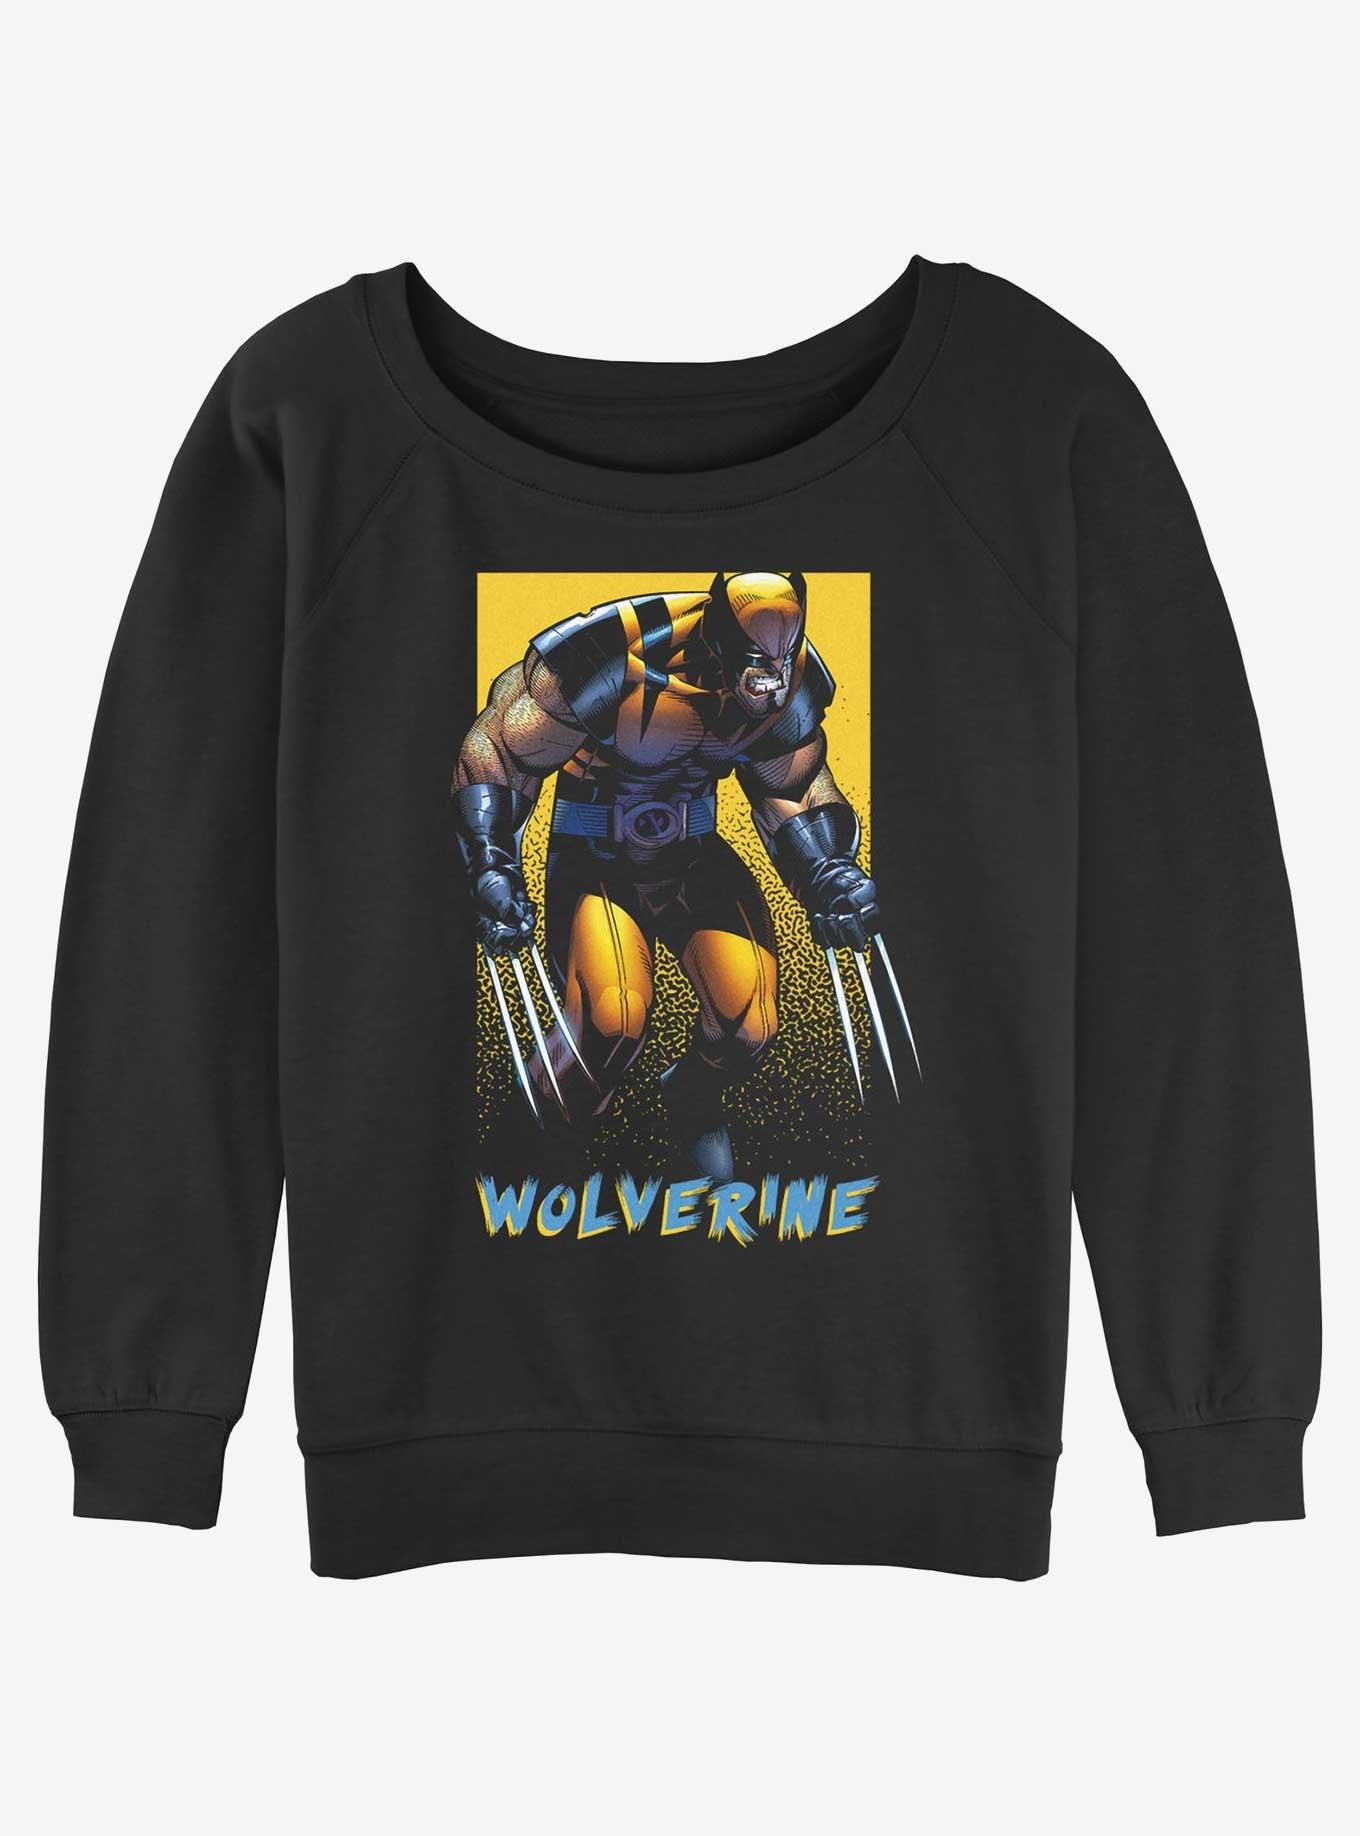 Wolverine Claws Out Poster Girls Slouchy Sweatshirt, BLACK, hi-res